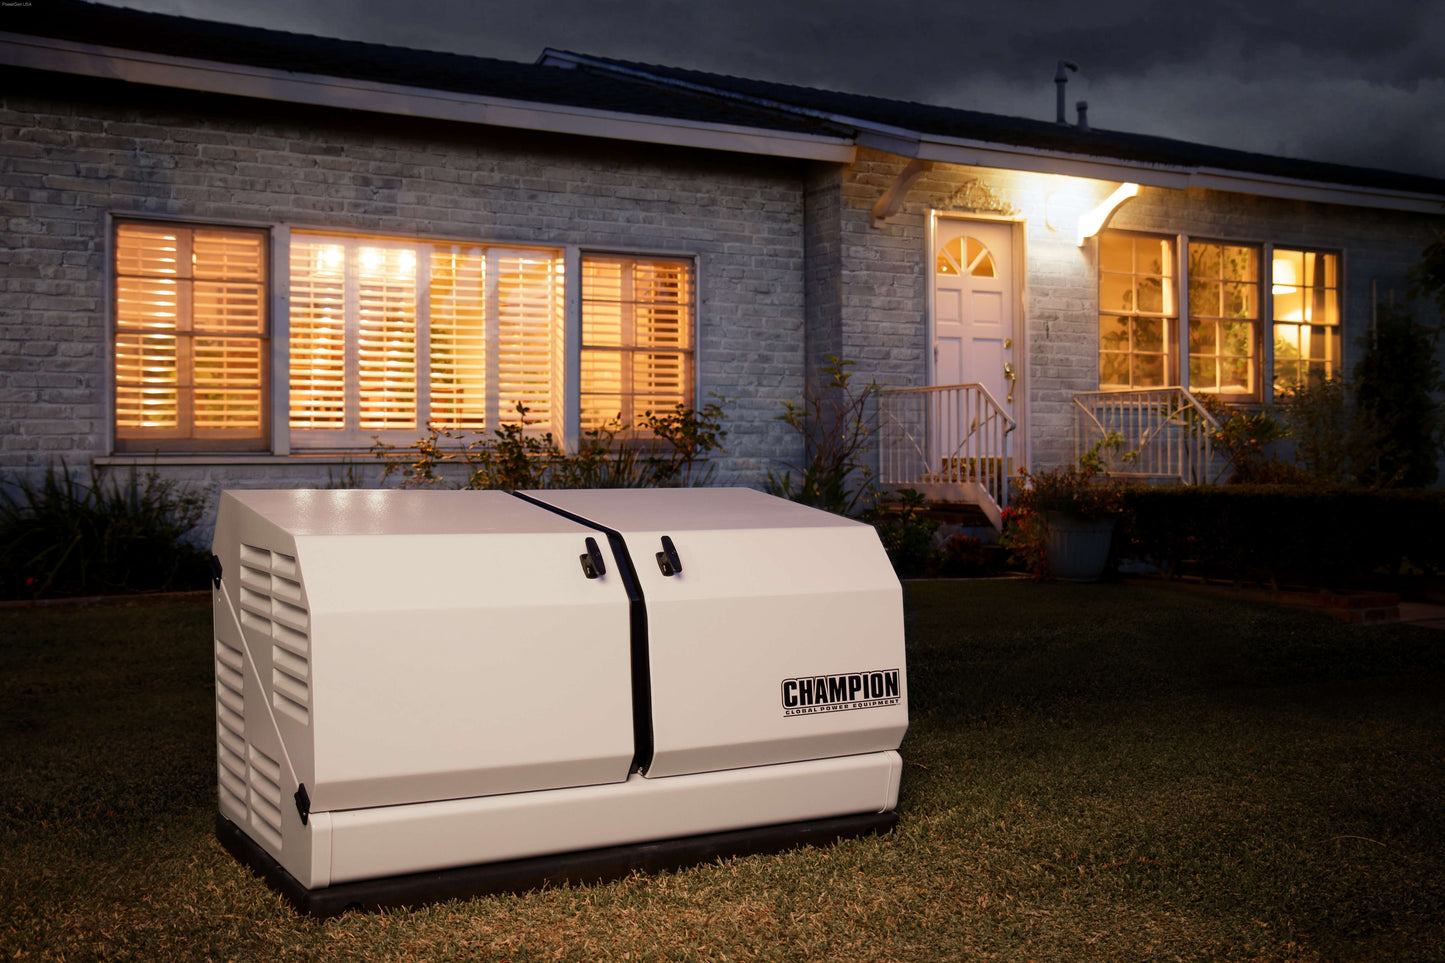 Dual Fuel Hybrid - Champion 14kW AXis Home Standby Generator System With 200-Amp AXis Automatic Transfer Switch